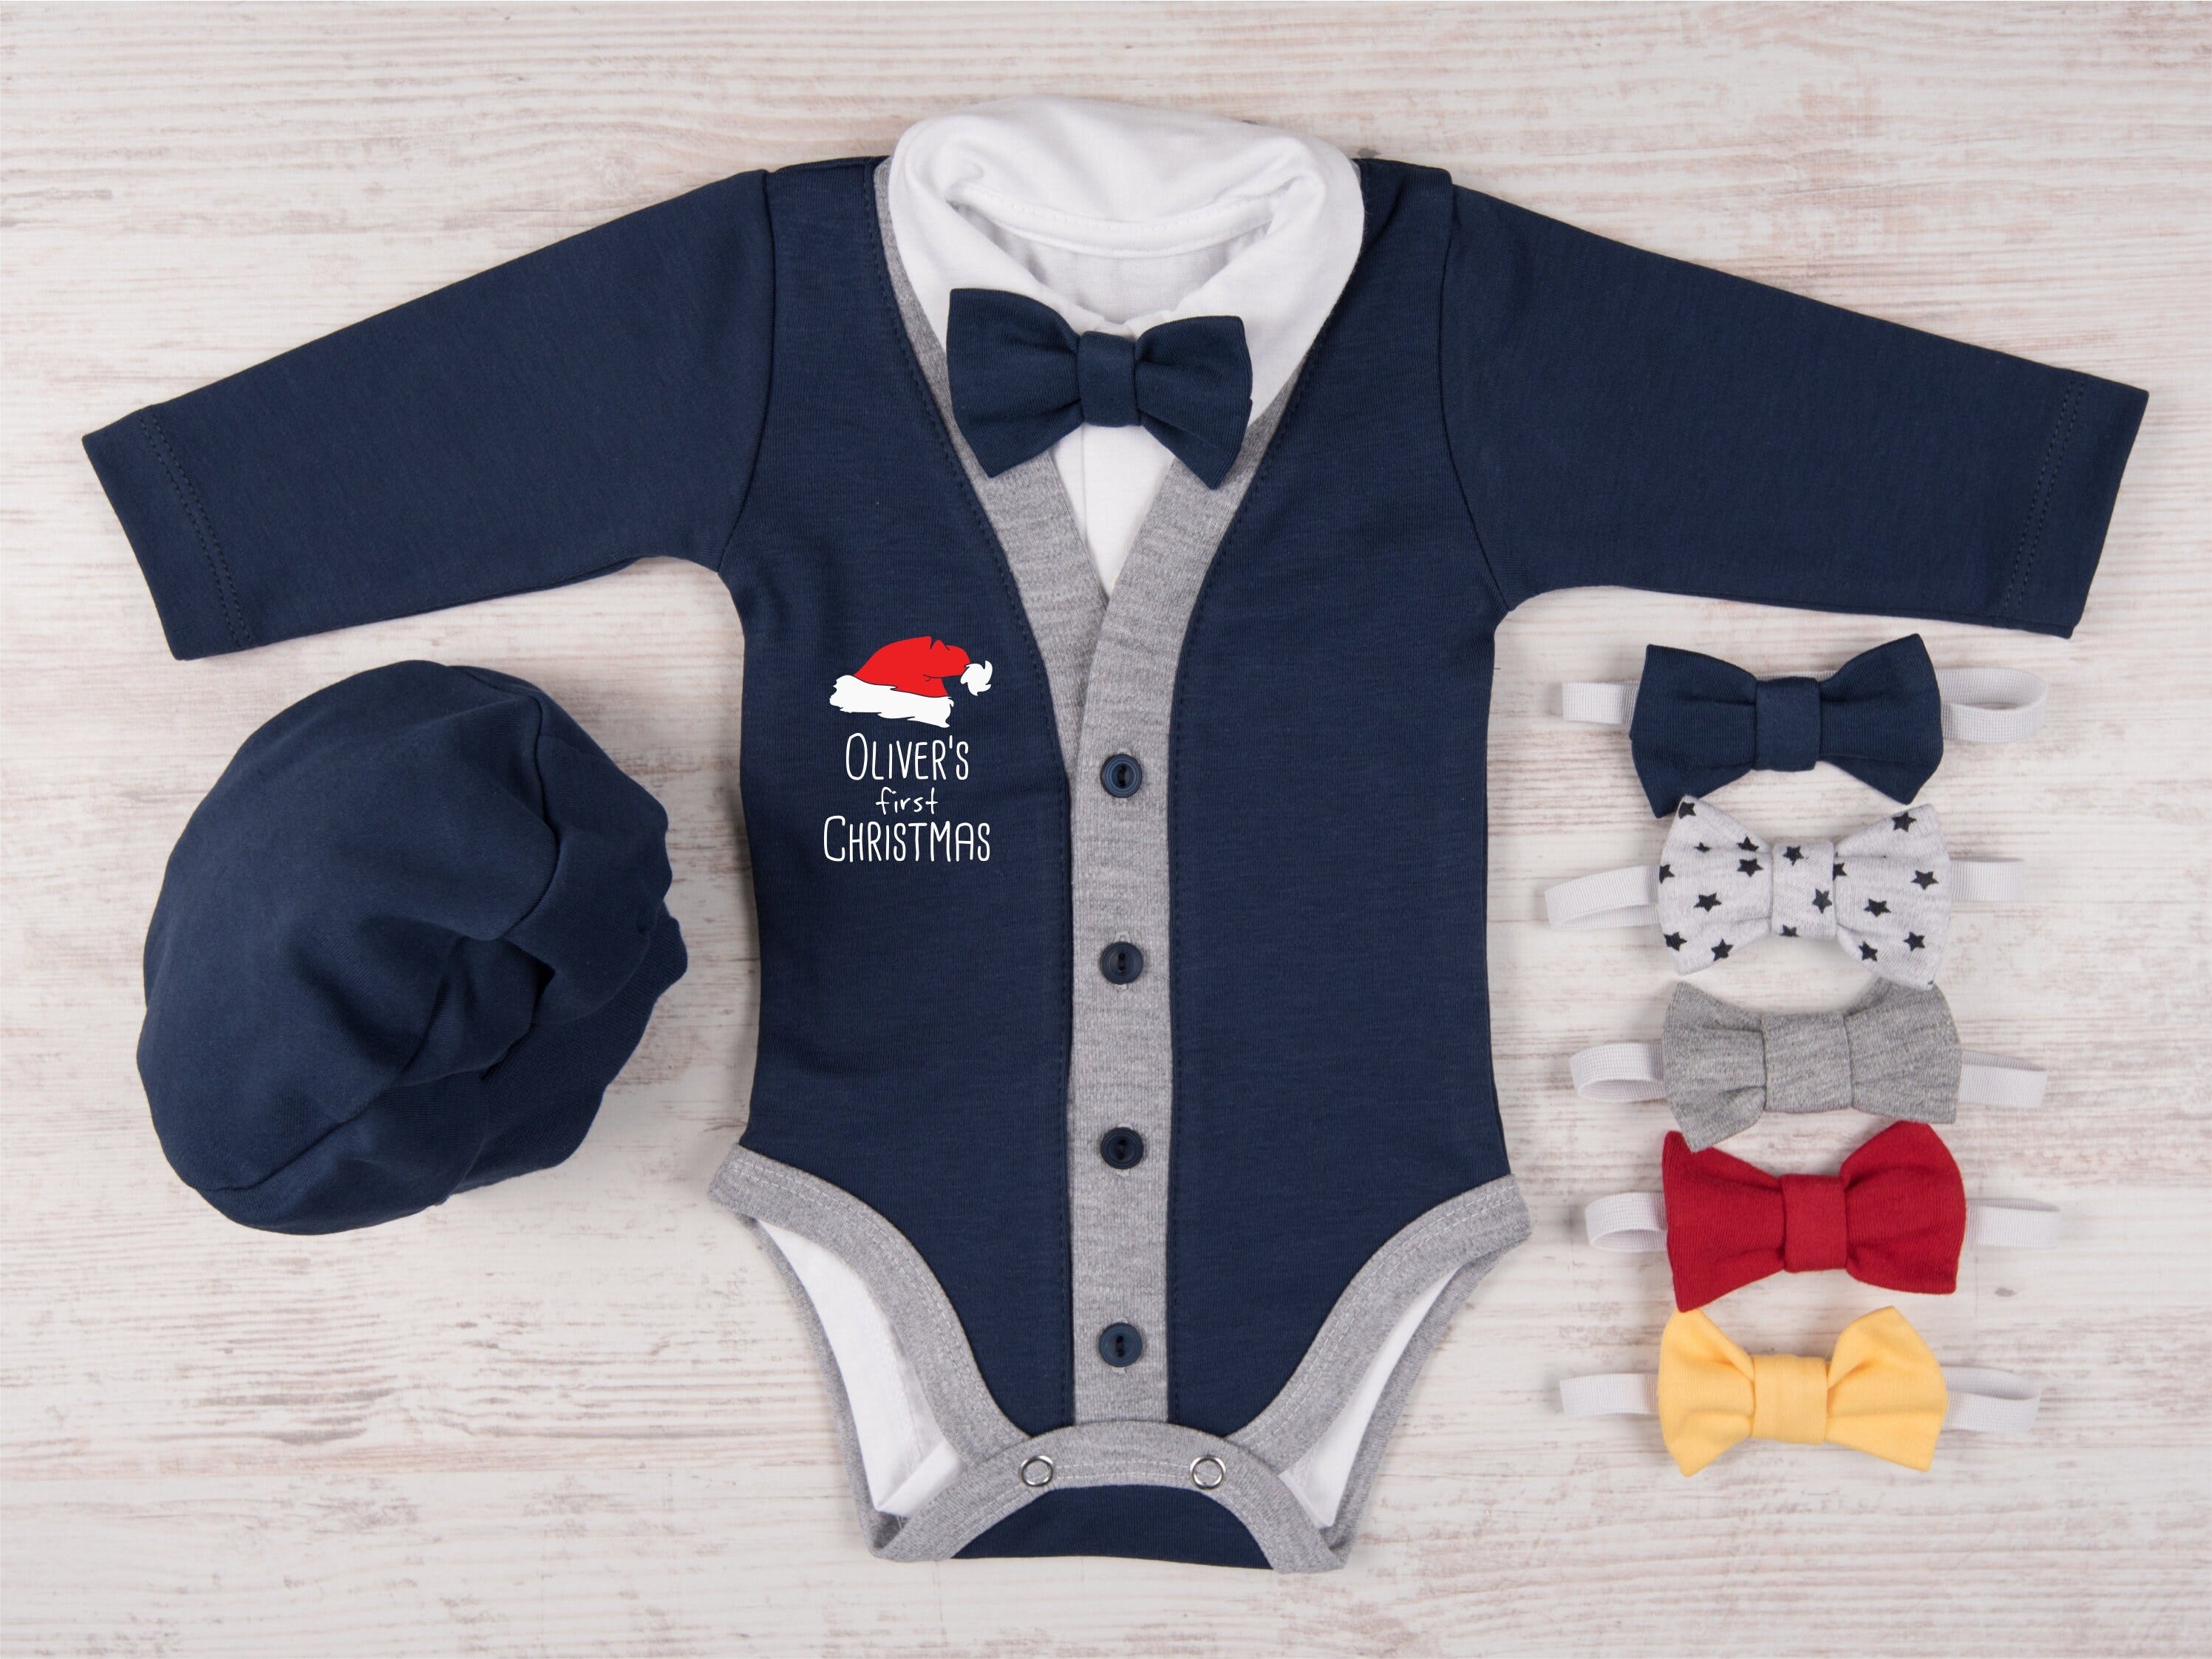 First Christmas Boy Outfit, Personalized 1st Christmas Navy Cardigan, Bodysuit, Hat & Bow Tie Photo Outfit